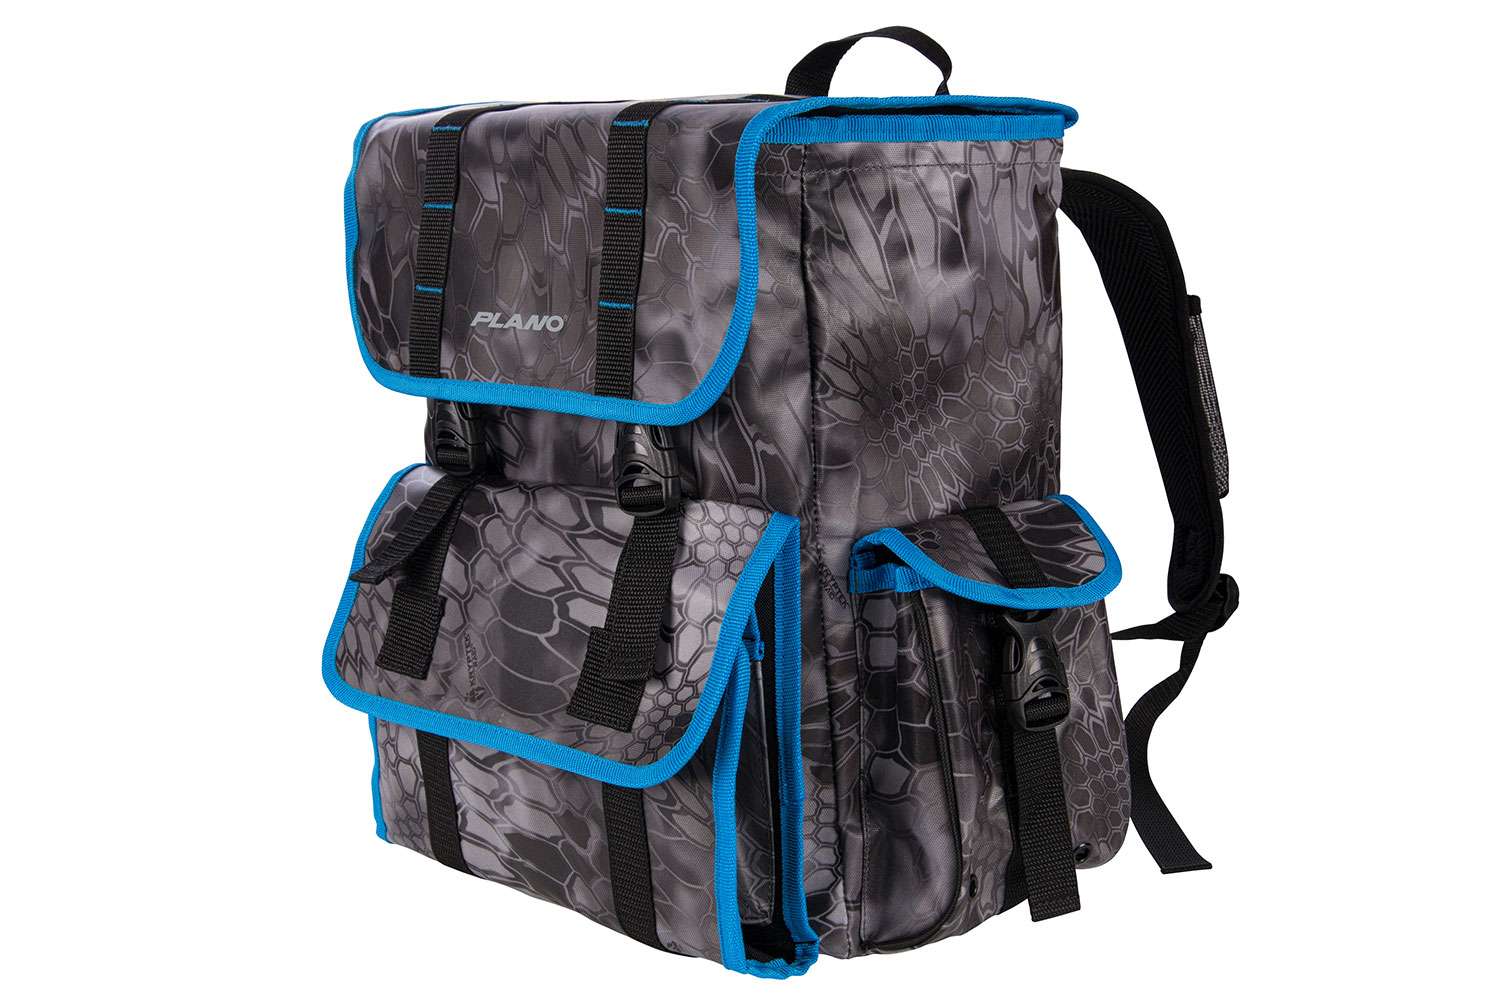 Plano Z-Series 3600 and 3700 Tackle Backpack, $99.99-$119.99